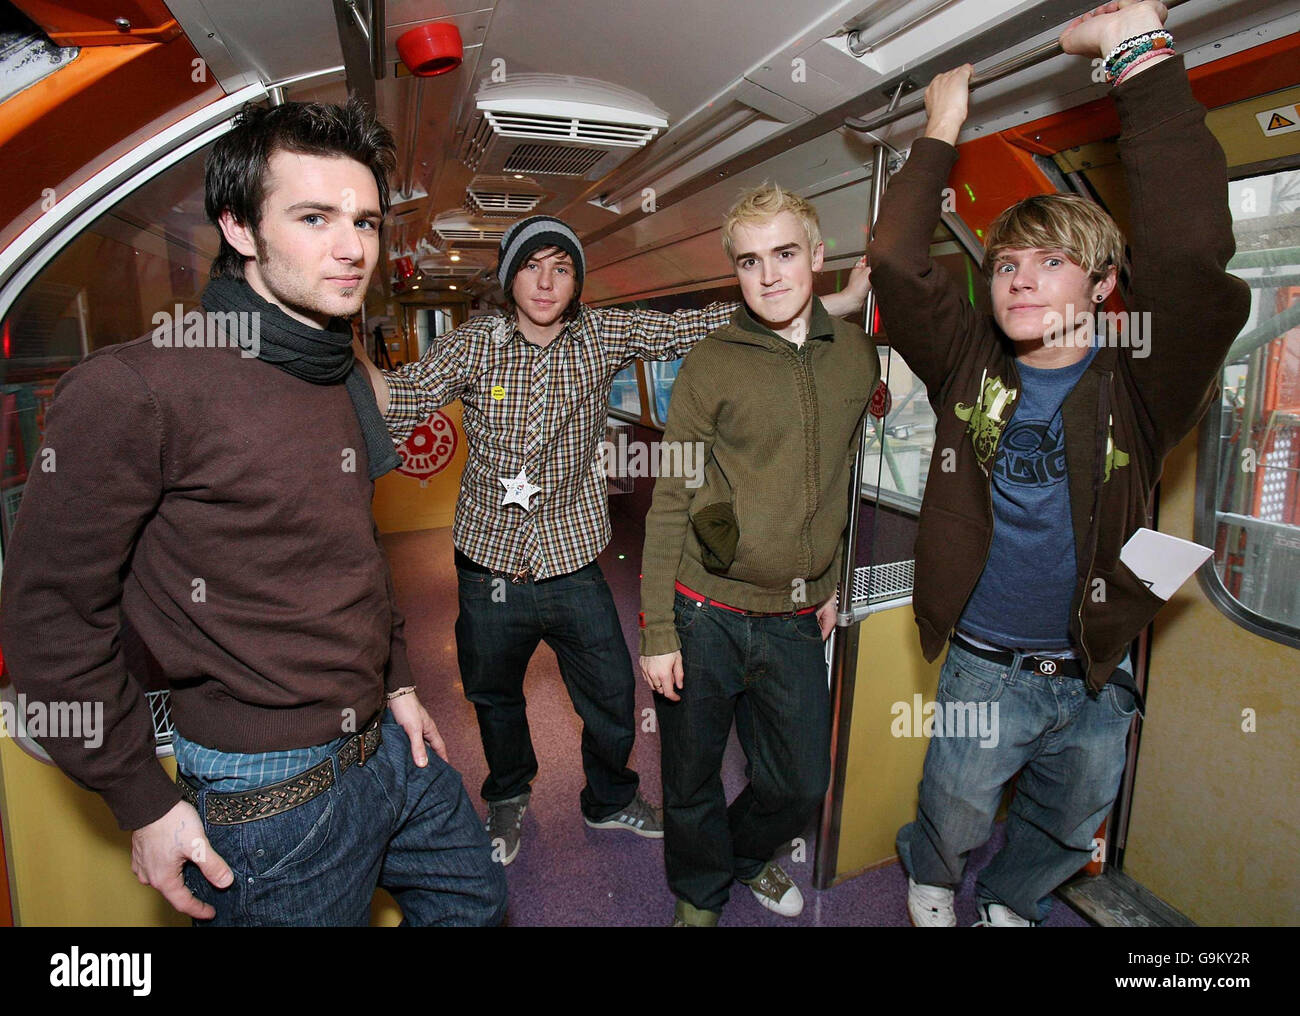 Members of McFly (left to right) Harry Judd, Danny Jones, Tom Fletcher and Dougie Poynter during a visit to Great Ormond Street Children's Hospital in central London. Stock Photo